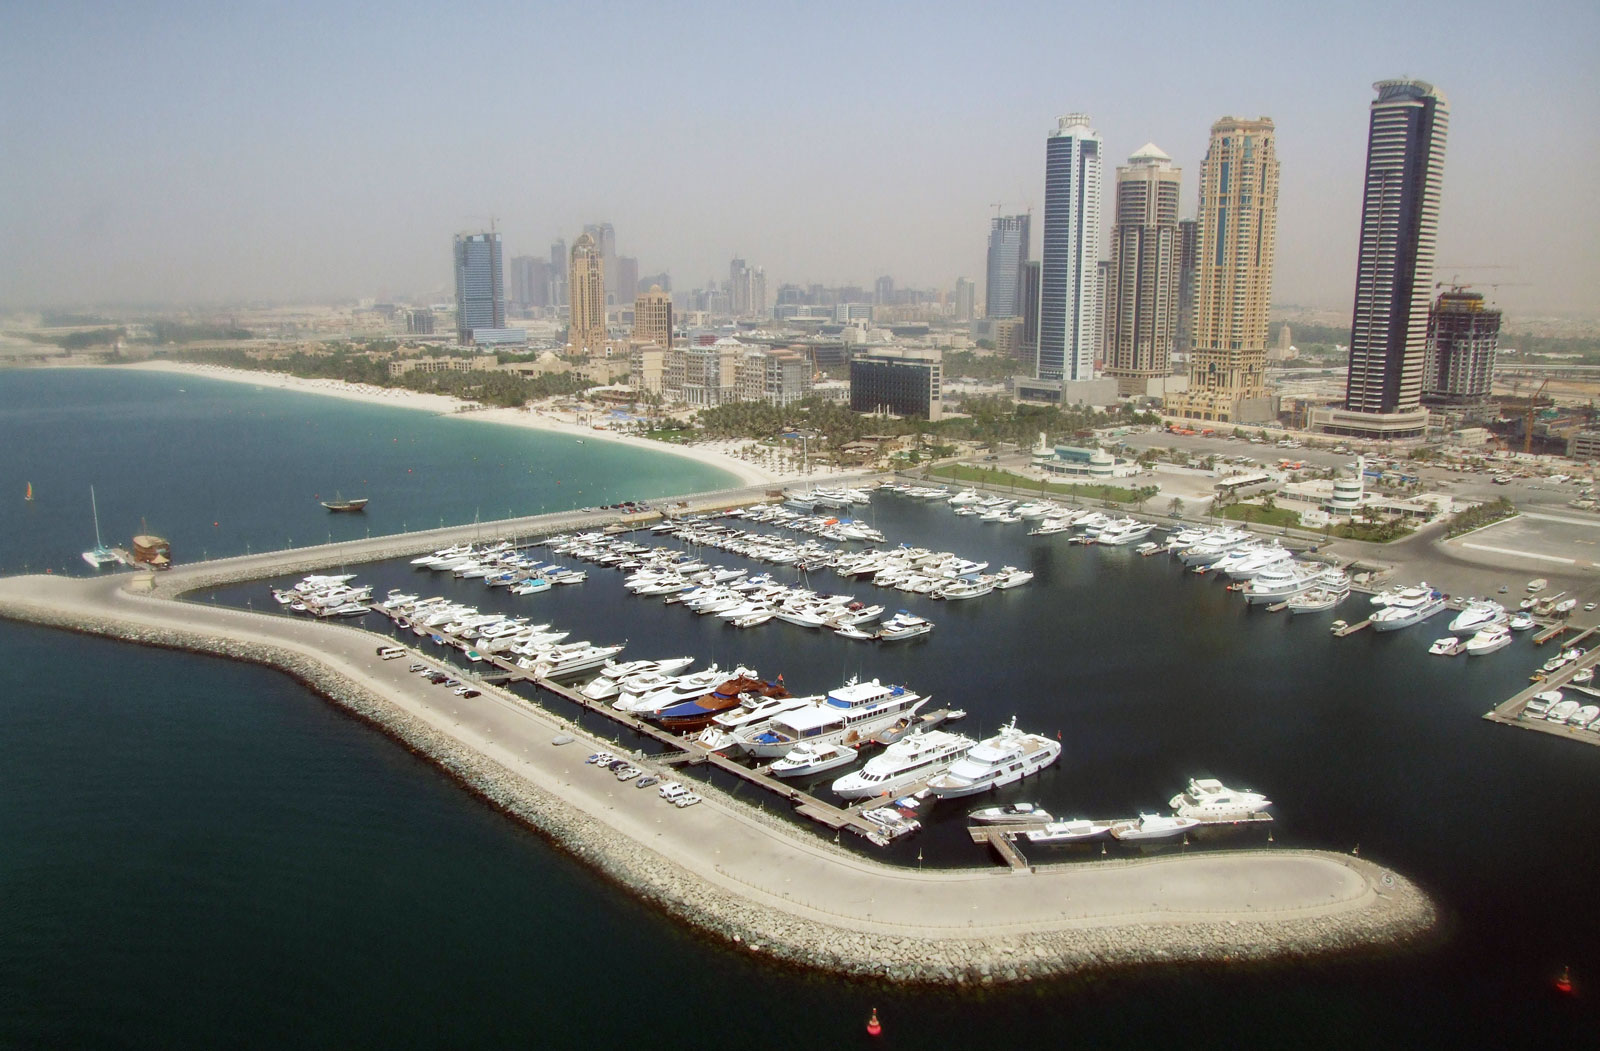 28 Arrested In Dubai For "Sex Party" On Yacht